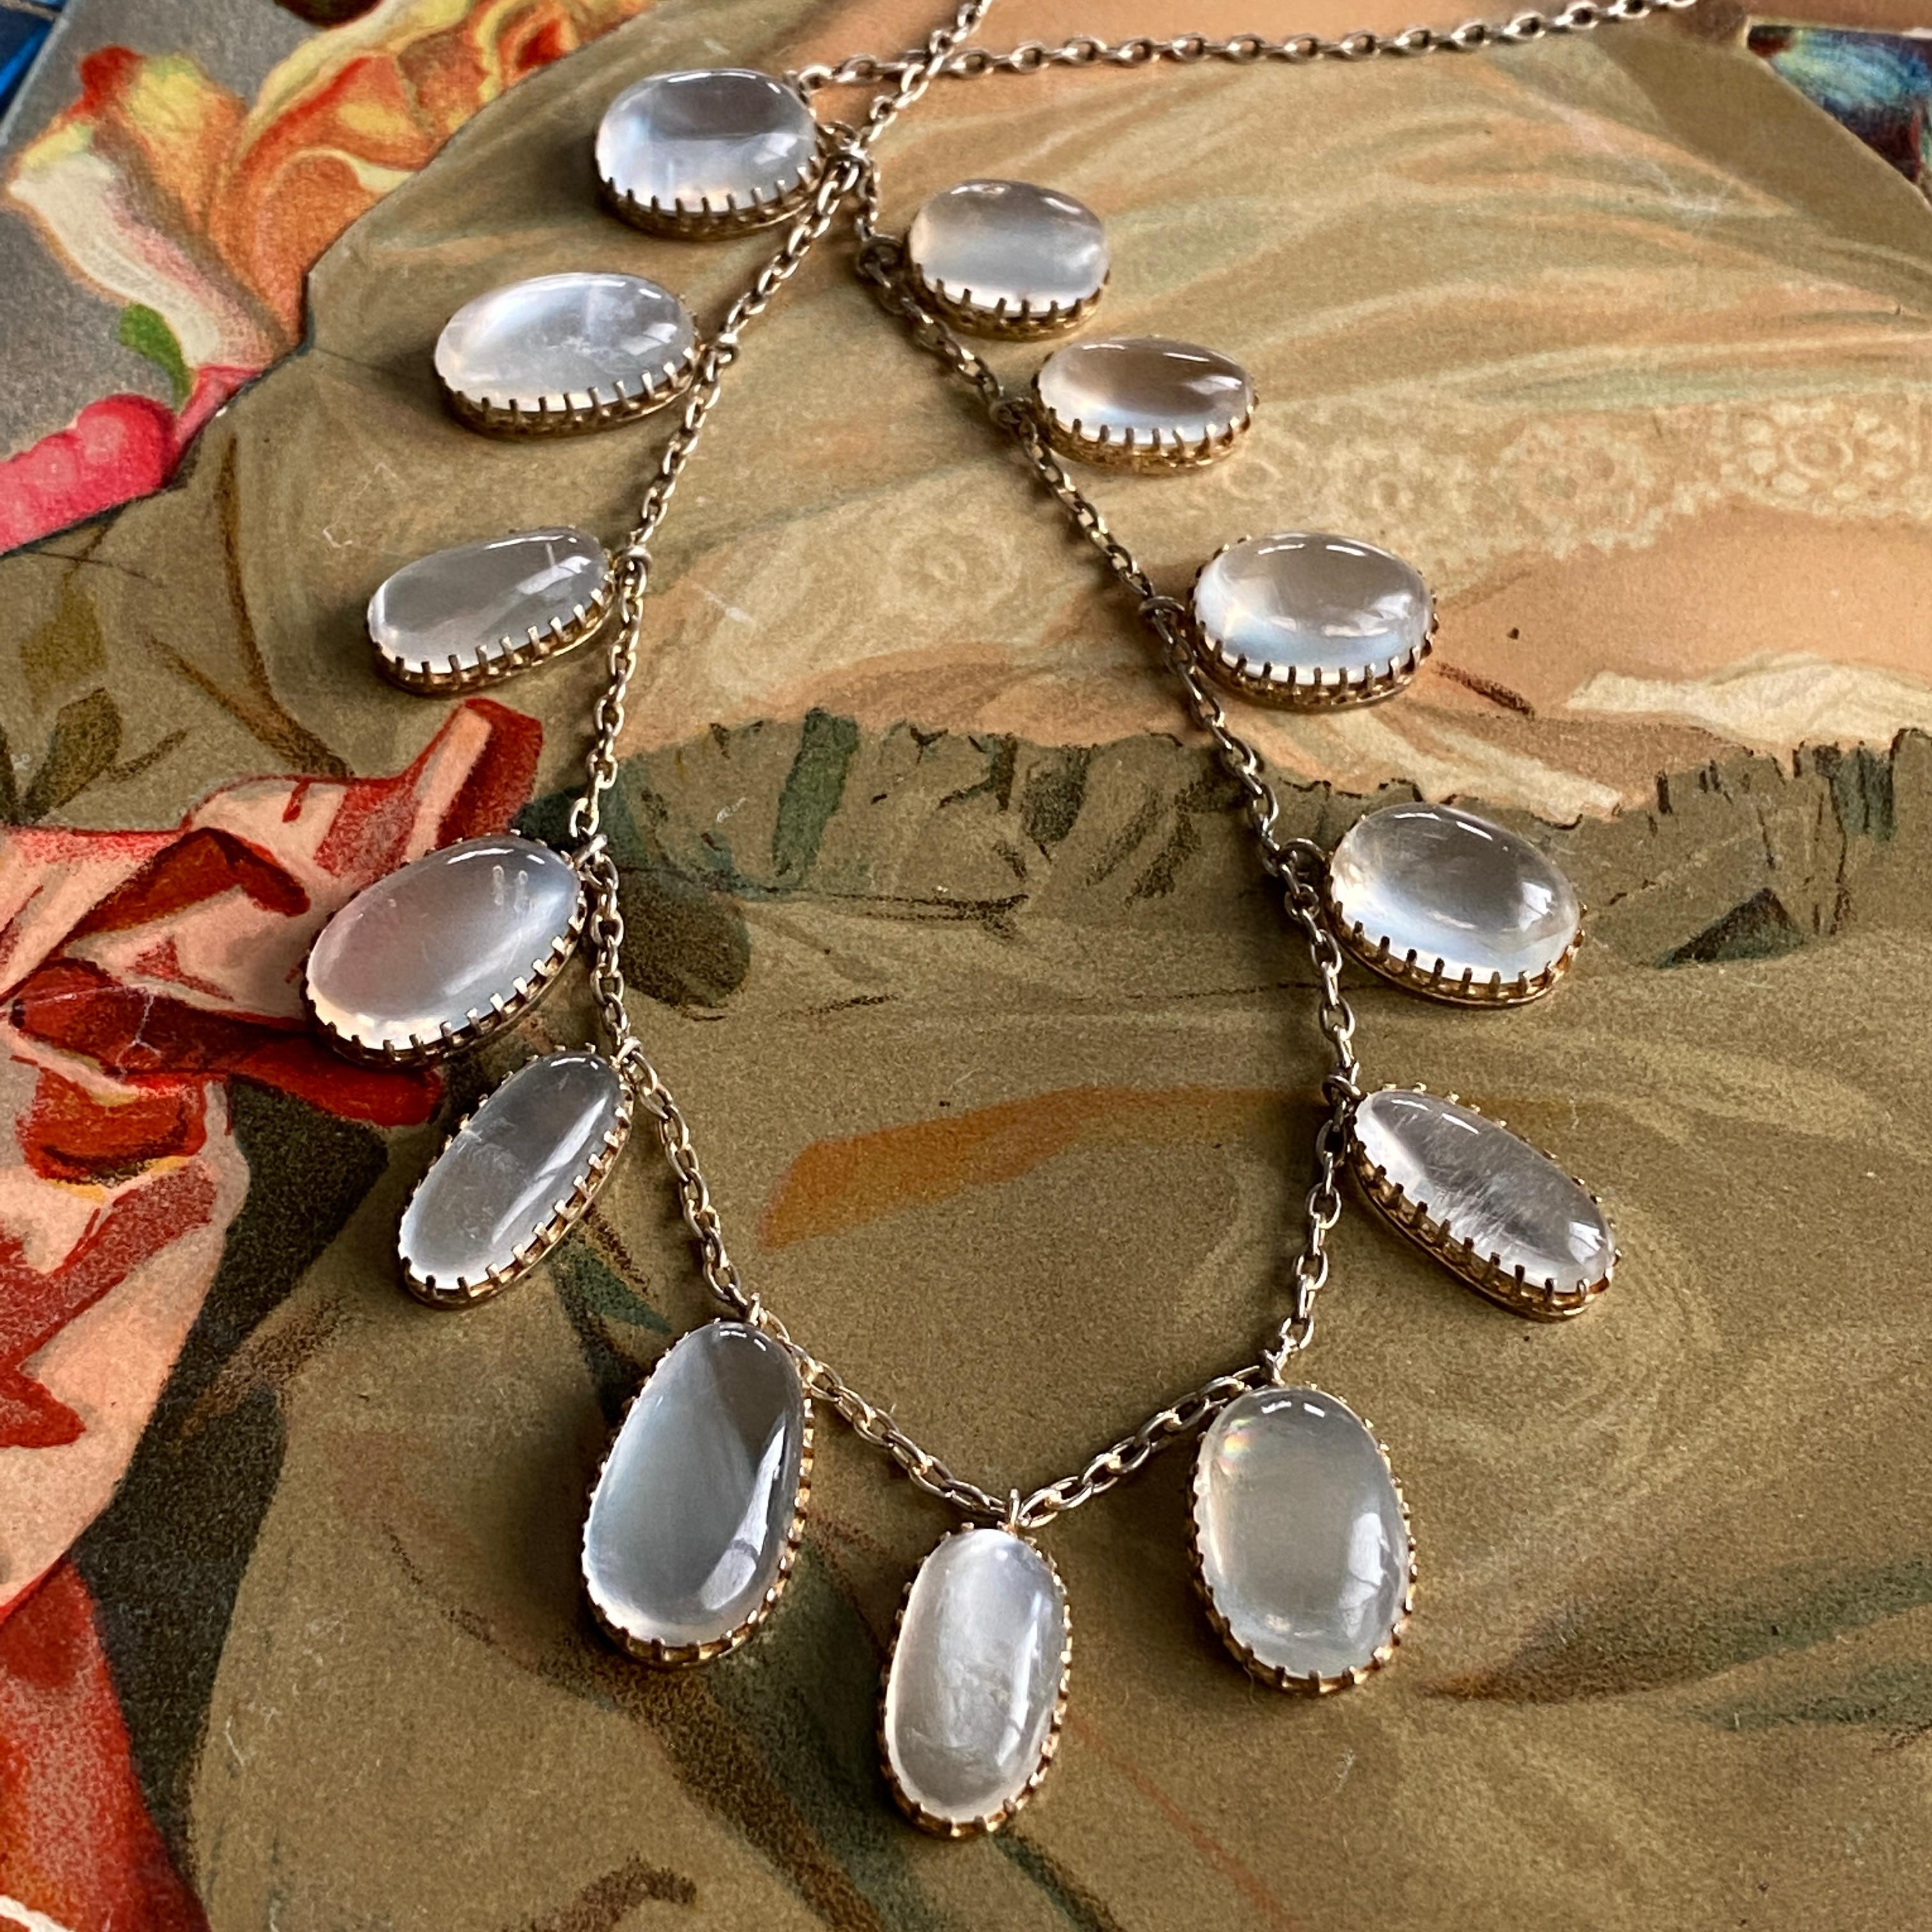 Details:
Full of charm! Sweet Edwardian Moonstone festoon necklace set in silver gilt. This necklace has feminine silvery gold chain with irregular natural cabochon graduated moonstone drops. The settings on the stones are beautiful, and detailed